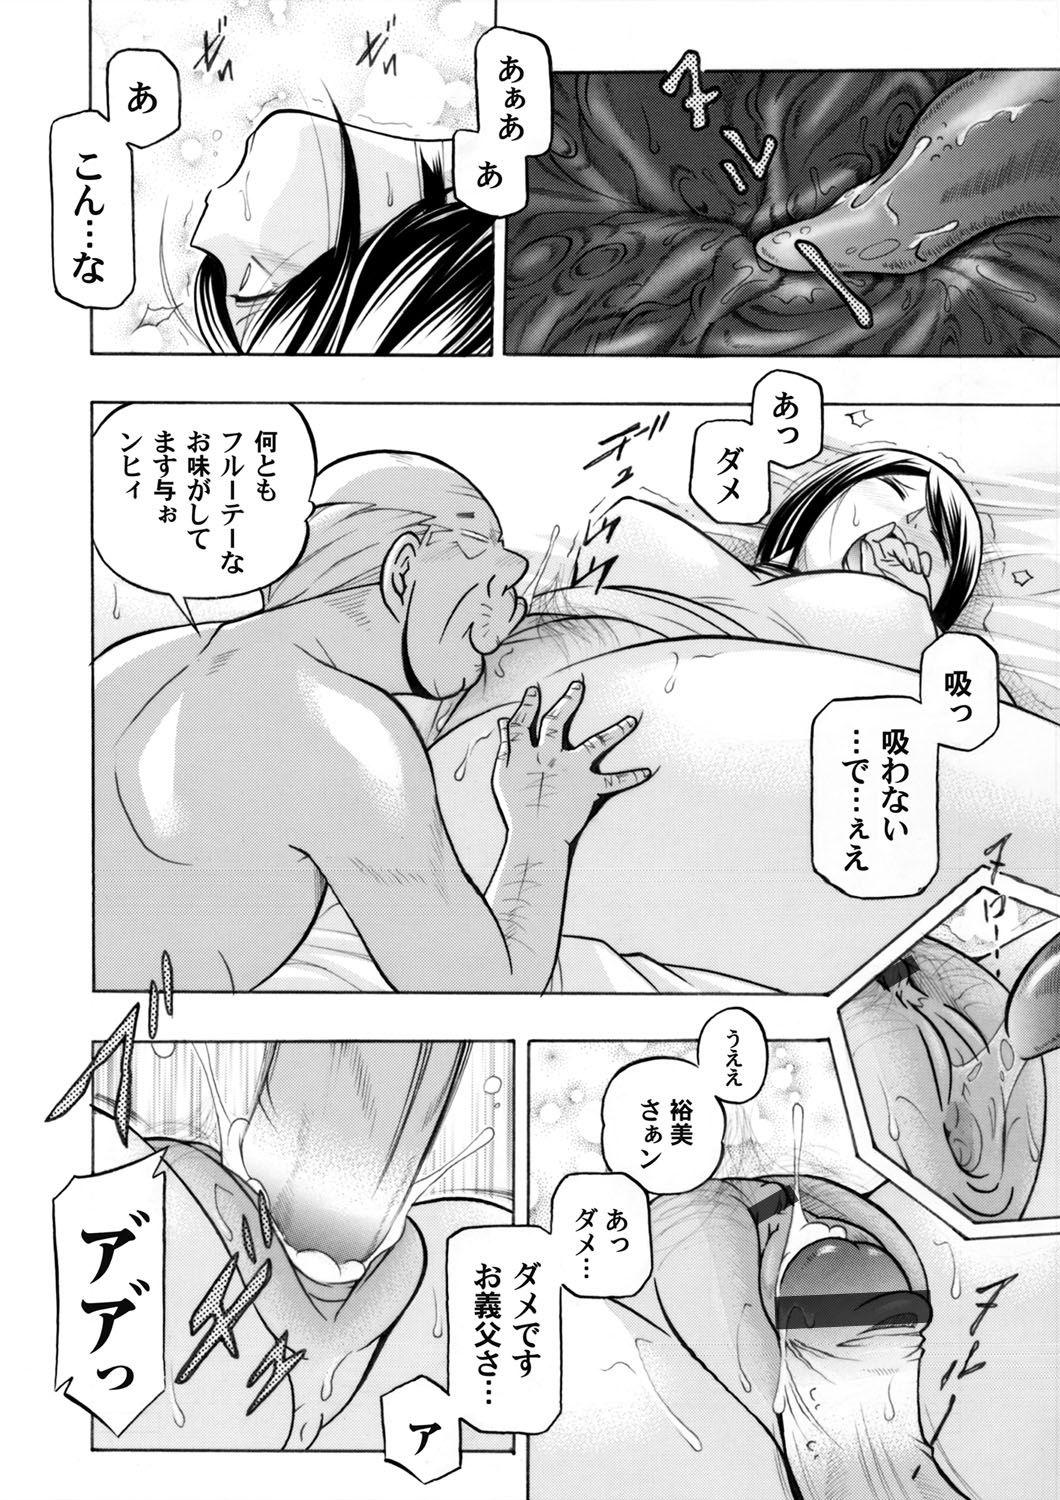 Compilation COMIC Magnum Vol. 65 Ass Licking - Page 5